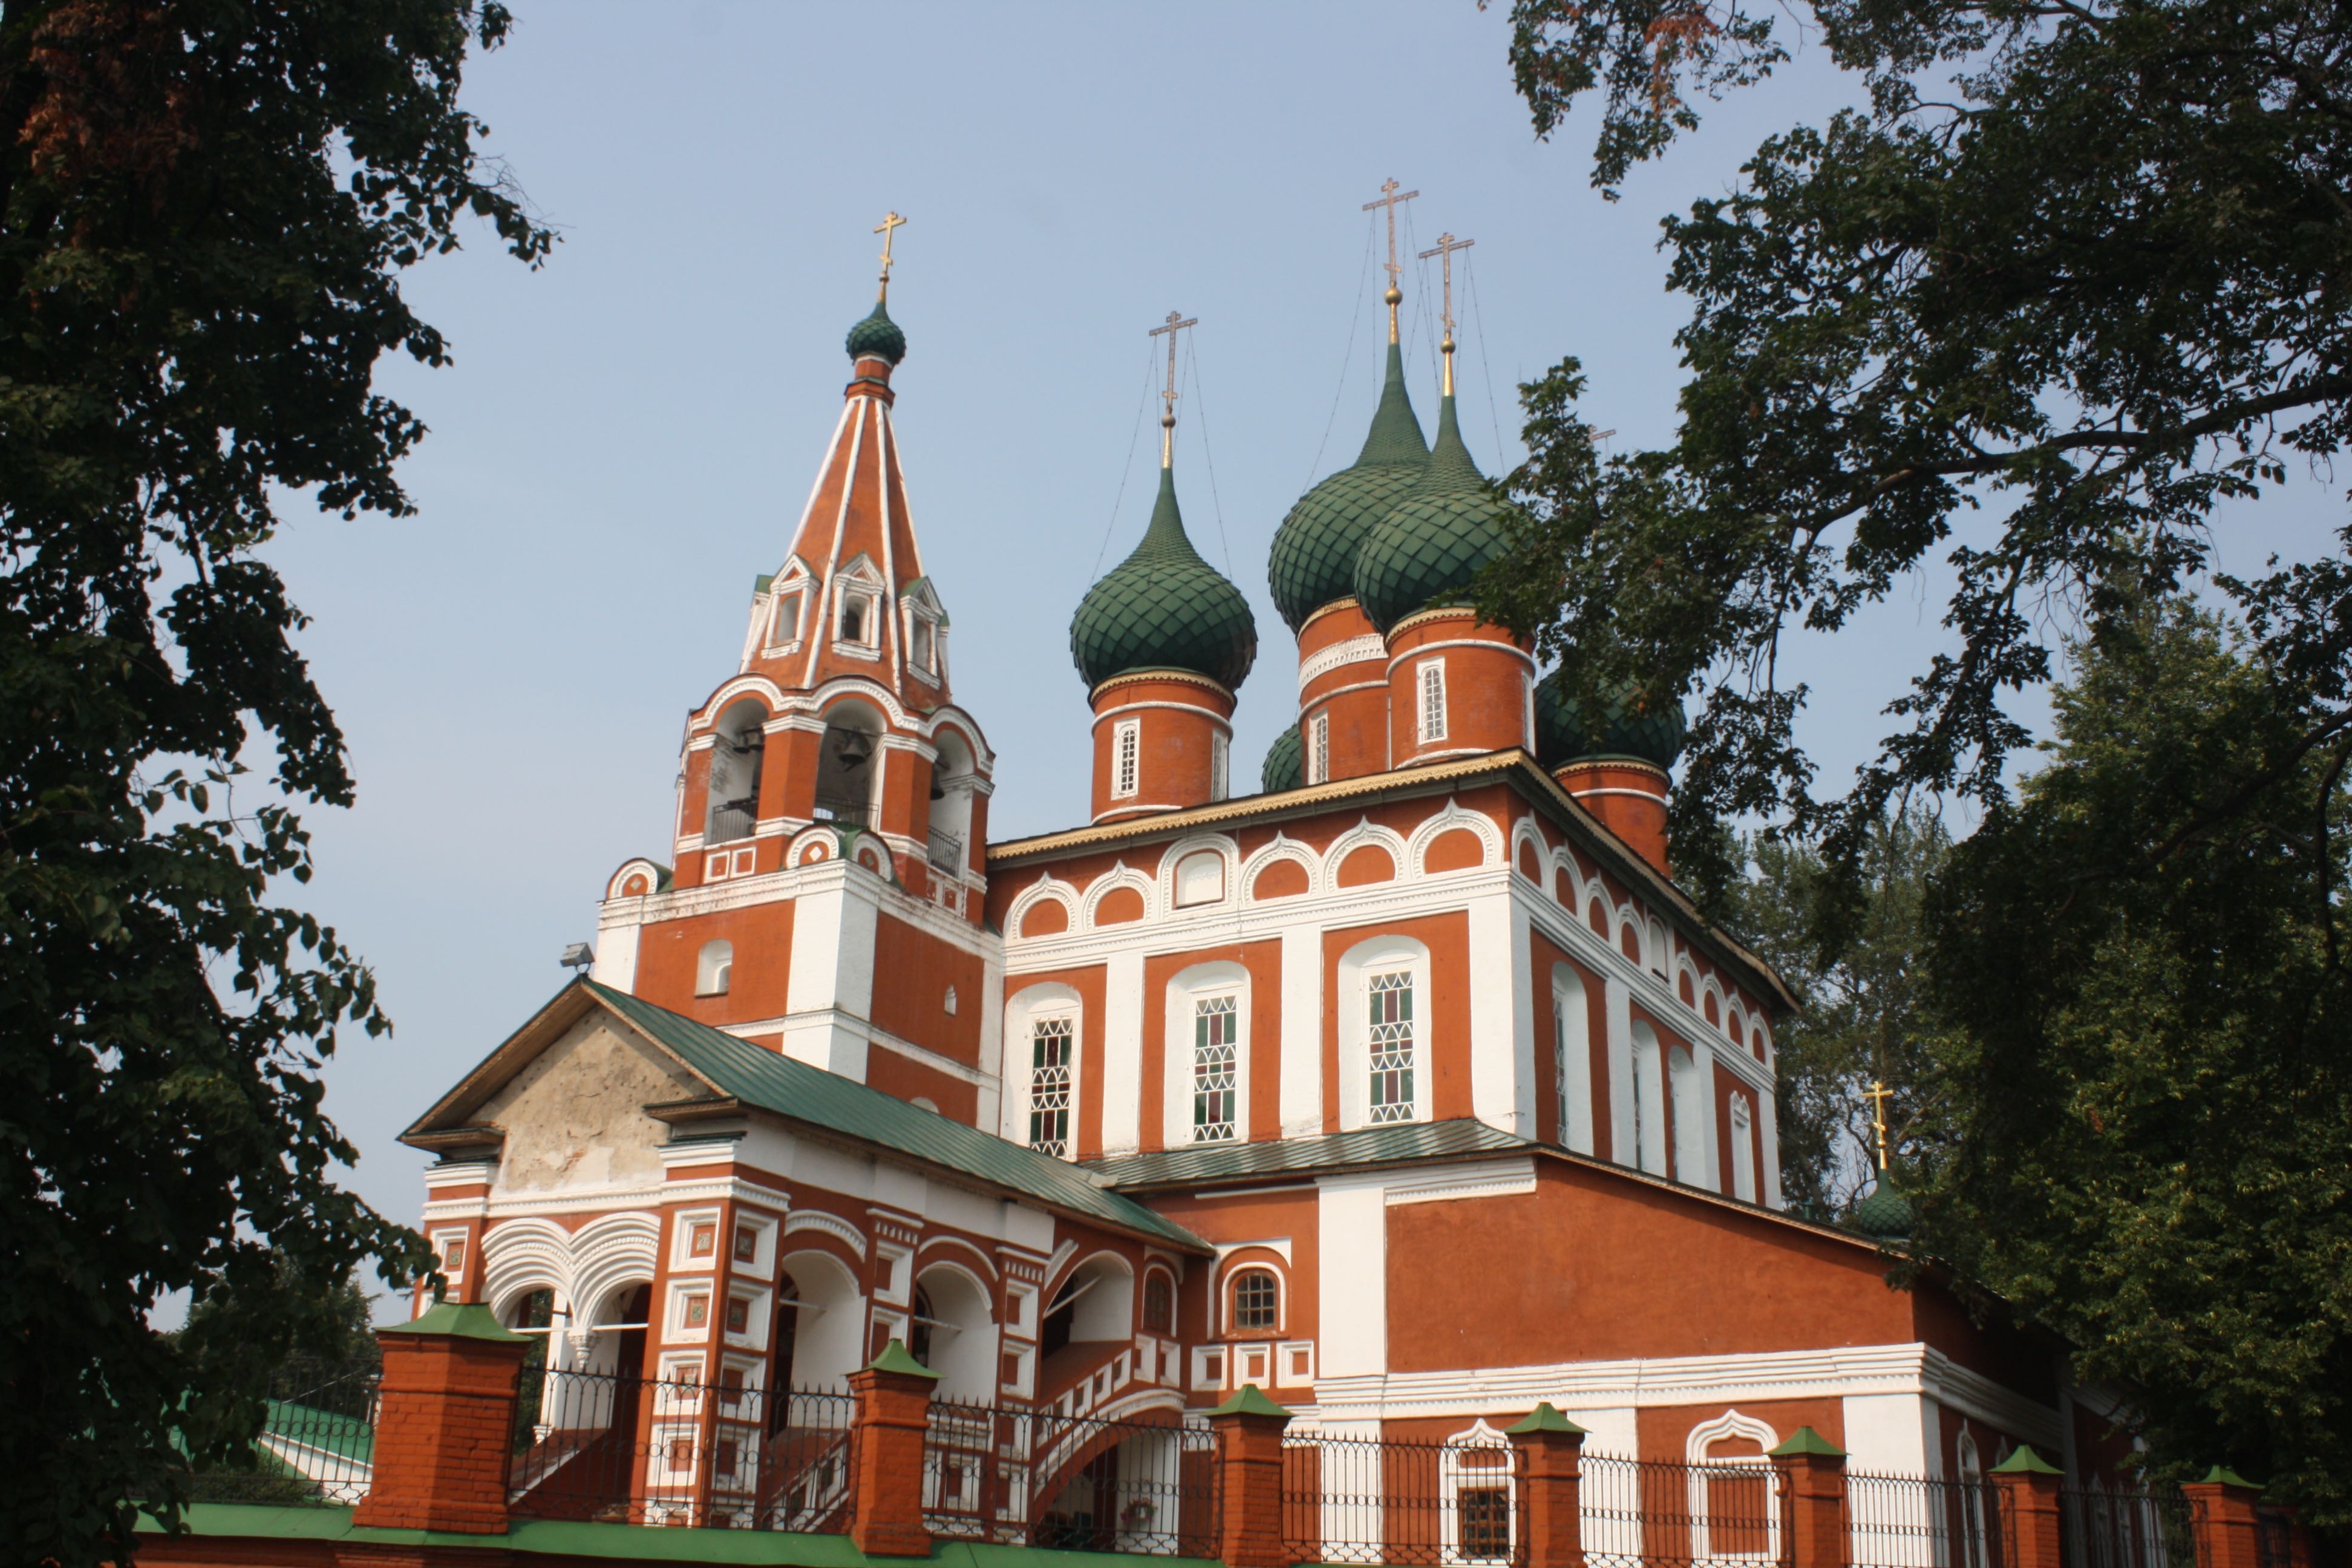 The city is famous for its colorful 17th century churches.